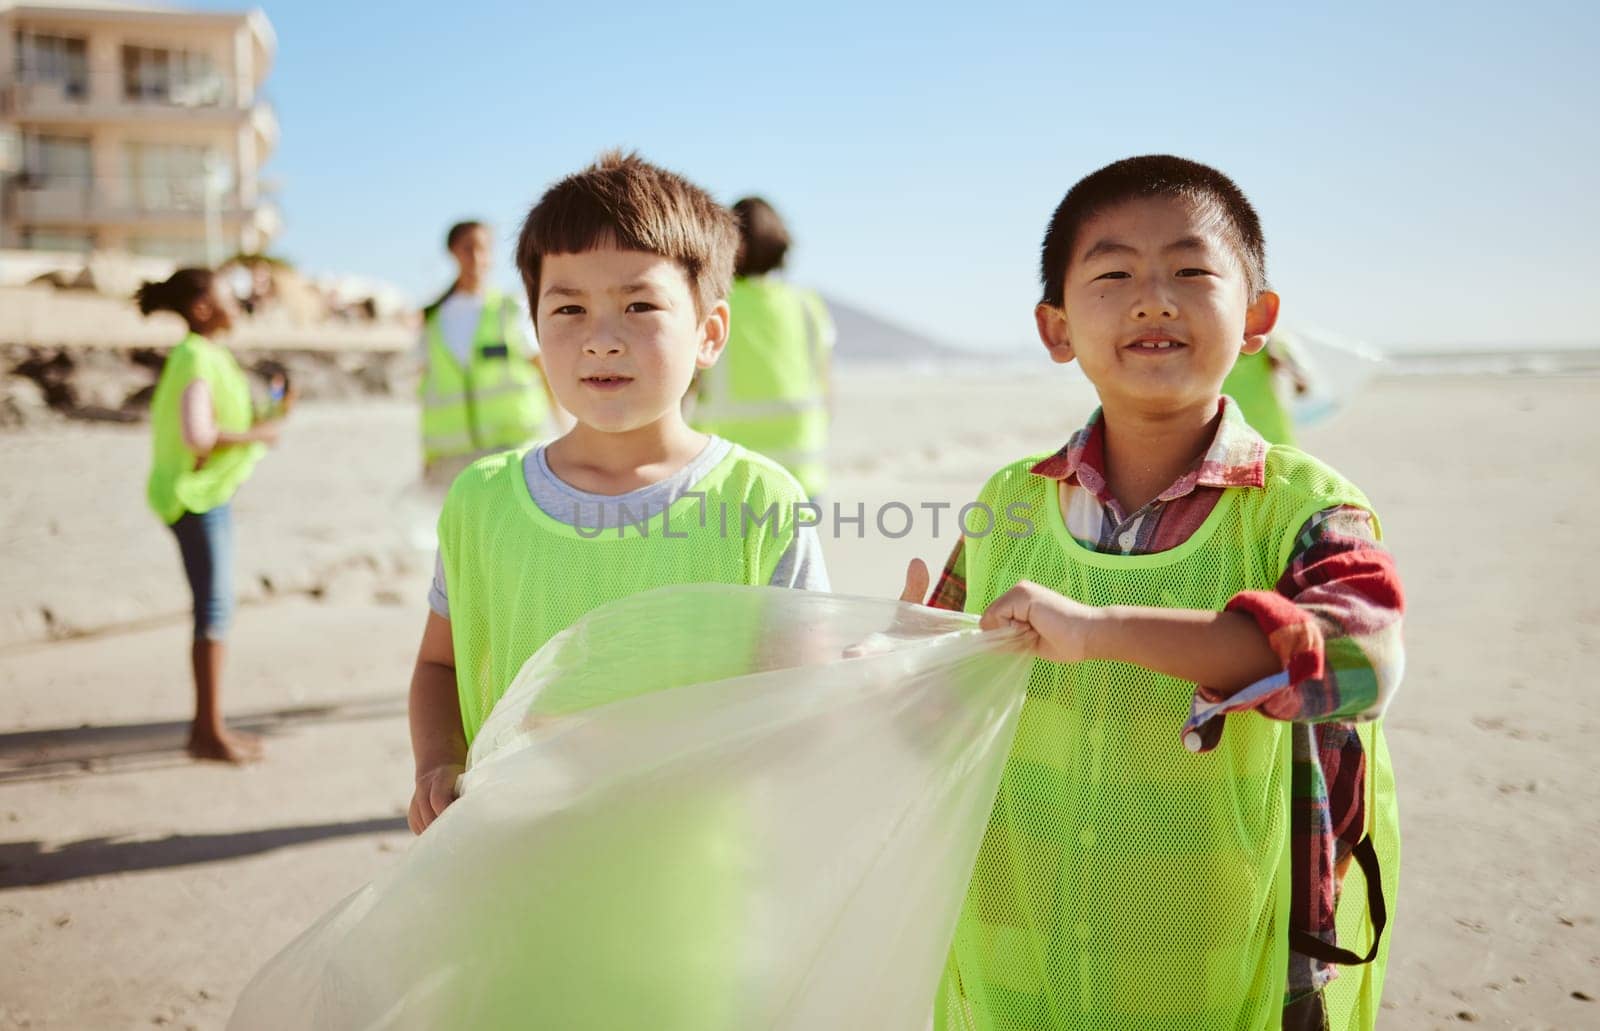 Children, portrait or trash collection bag in beach waste management, ocean cleanup or sea community service. Happy kids, climate change or cleaning volunteering plastic for nature recycling bonding.